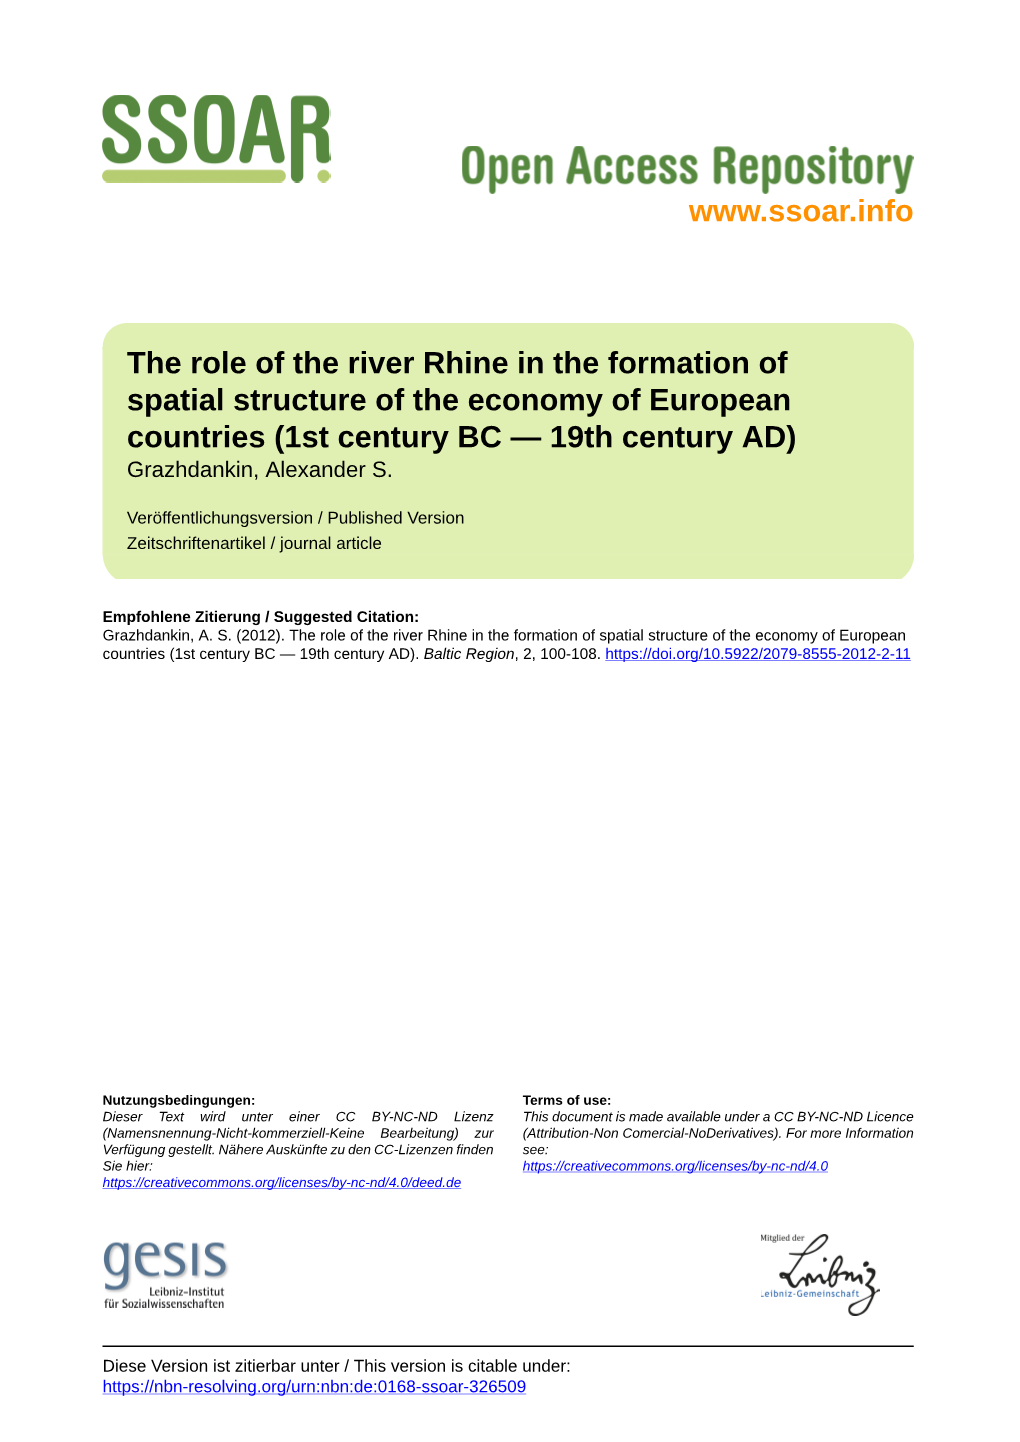 The Role of the River Rhine in the Formation of Spatial Structure of the Economy of European Countries (1St Century BC — 19Th Century AD) Grazhdankin, Alexander S